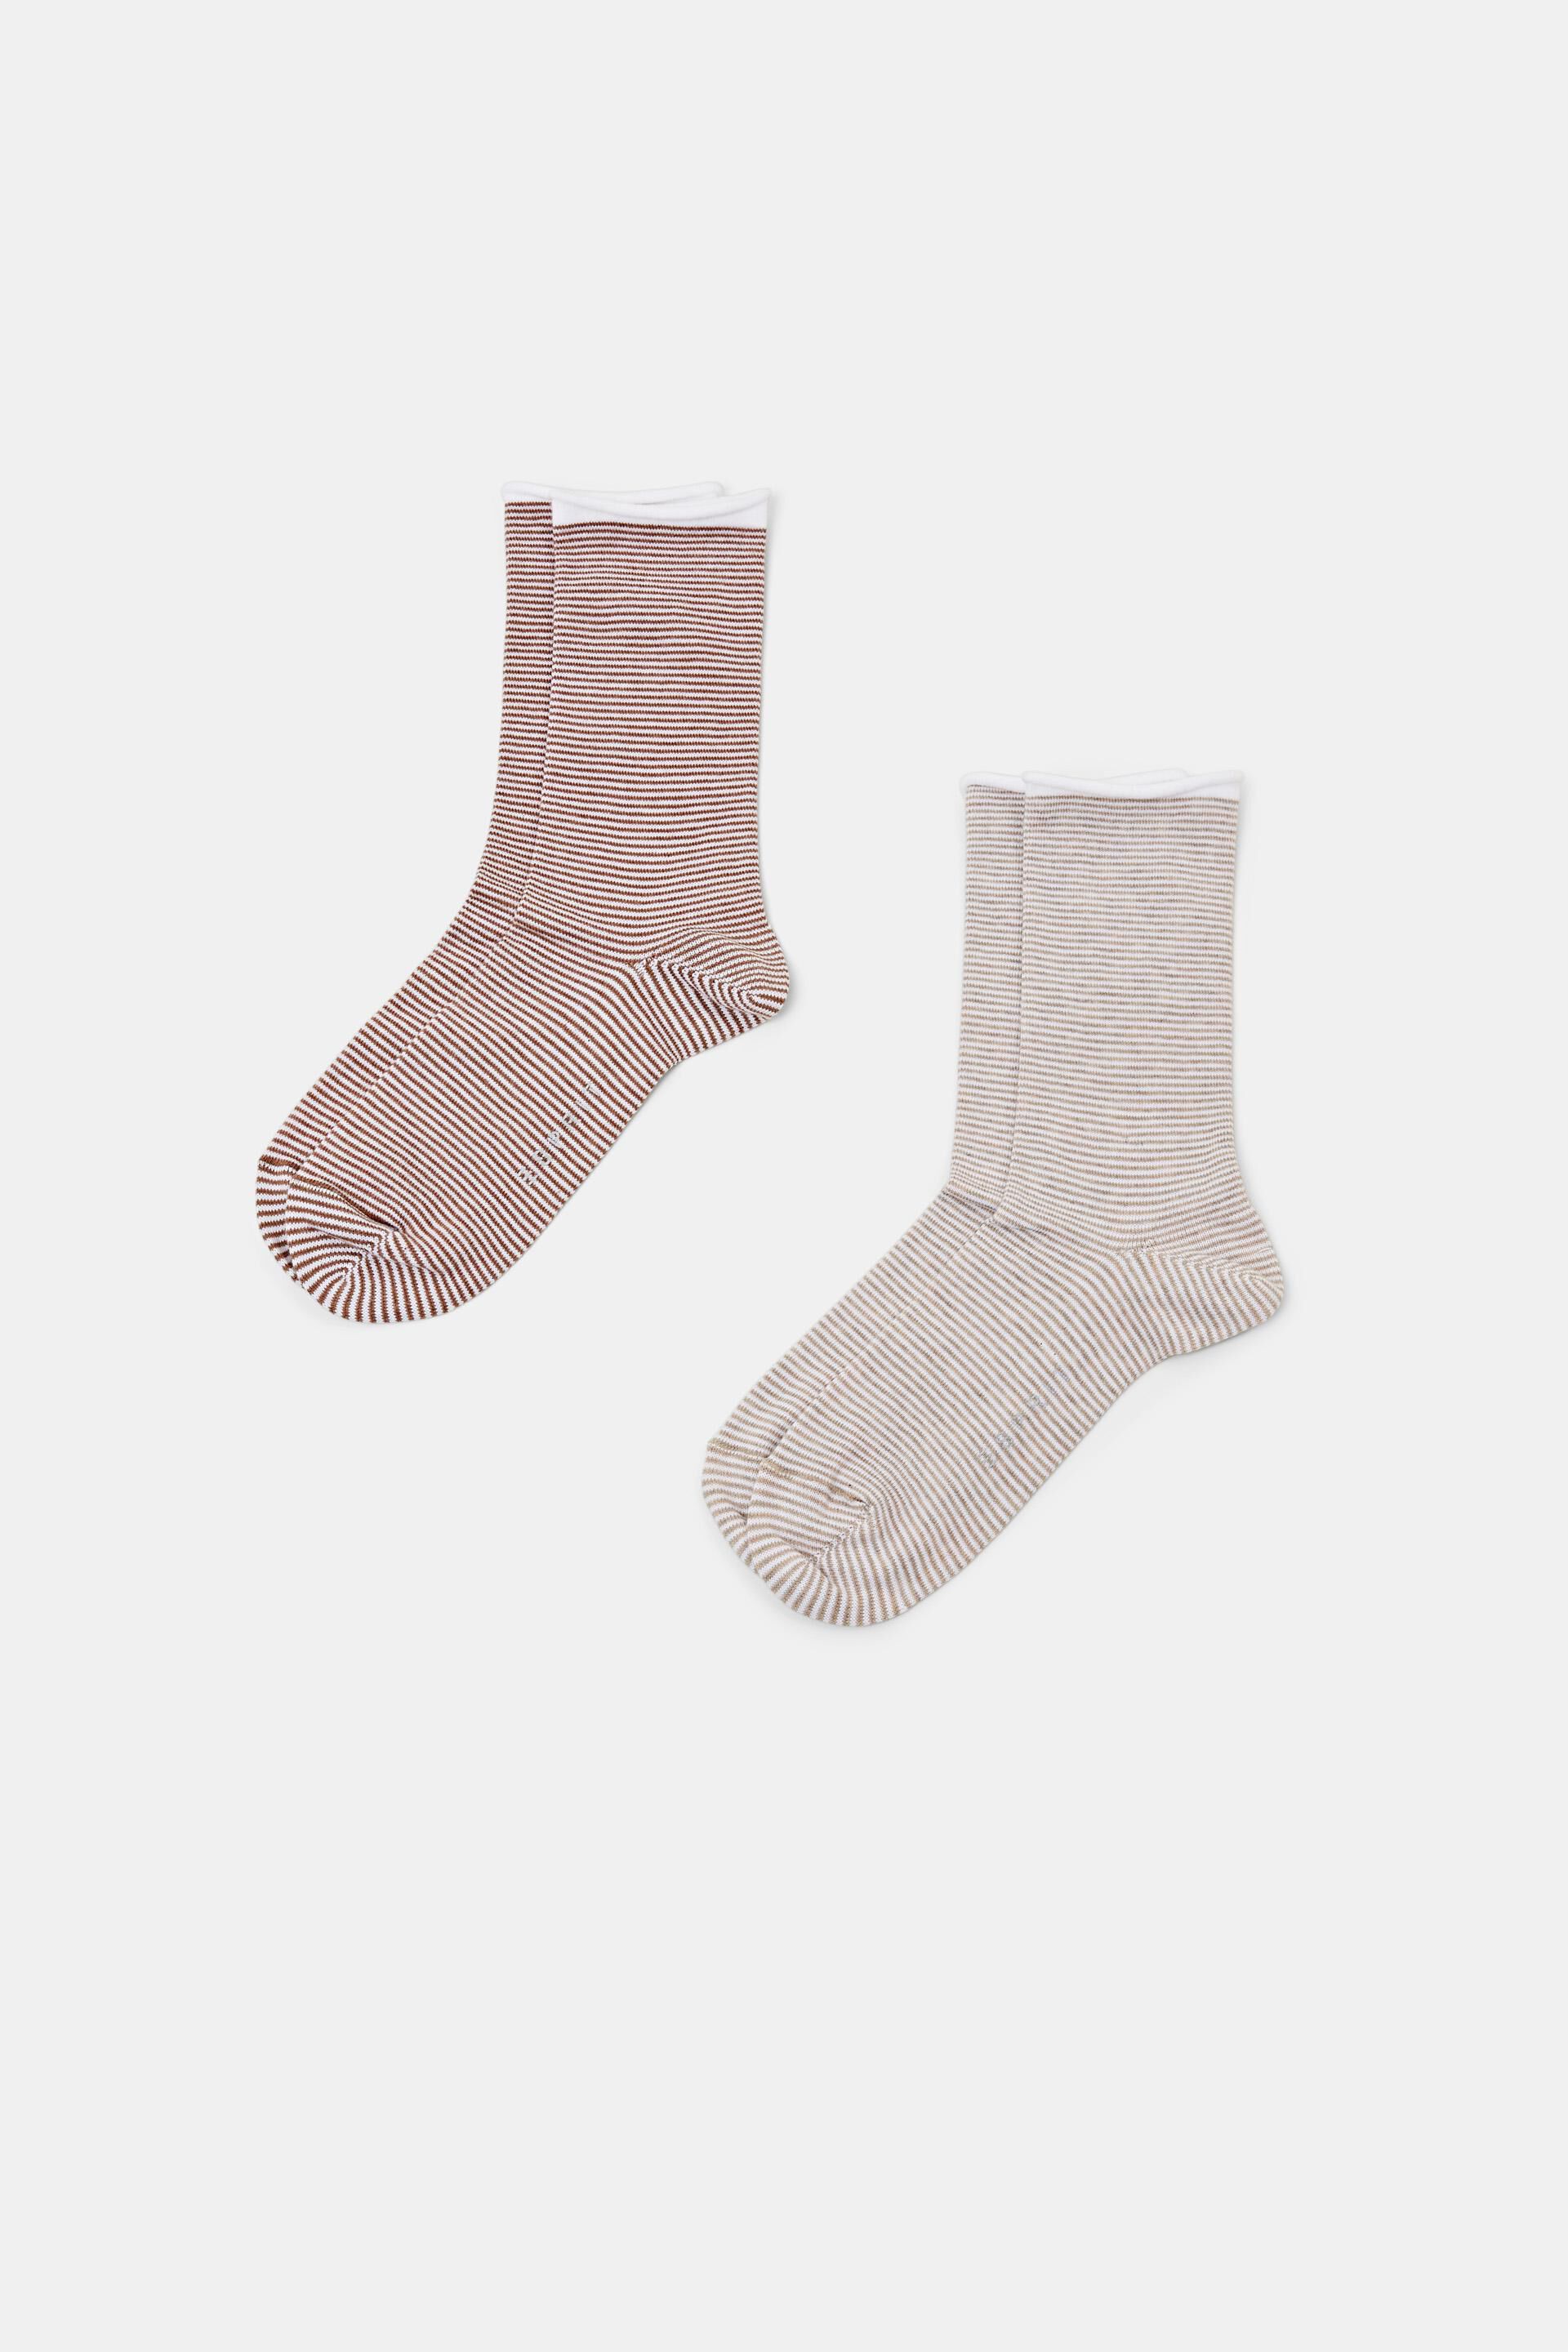 Esprit Online Store Striped socks with rolled cuffs, organic cotton